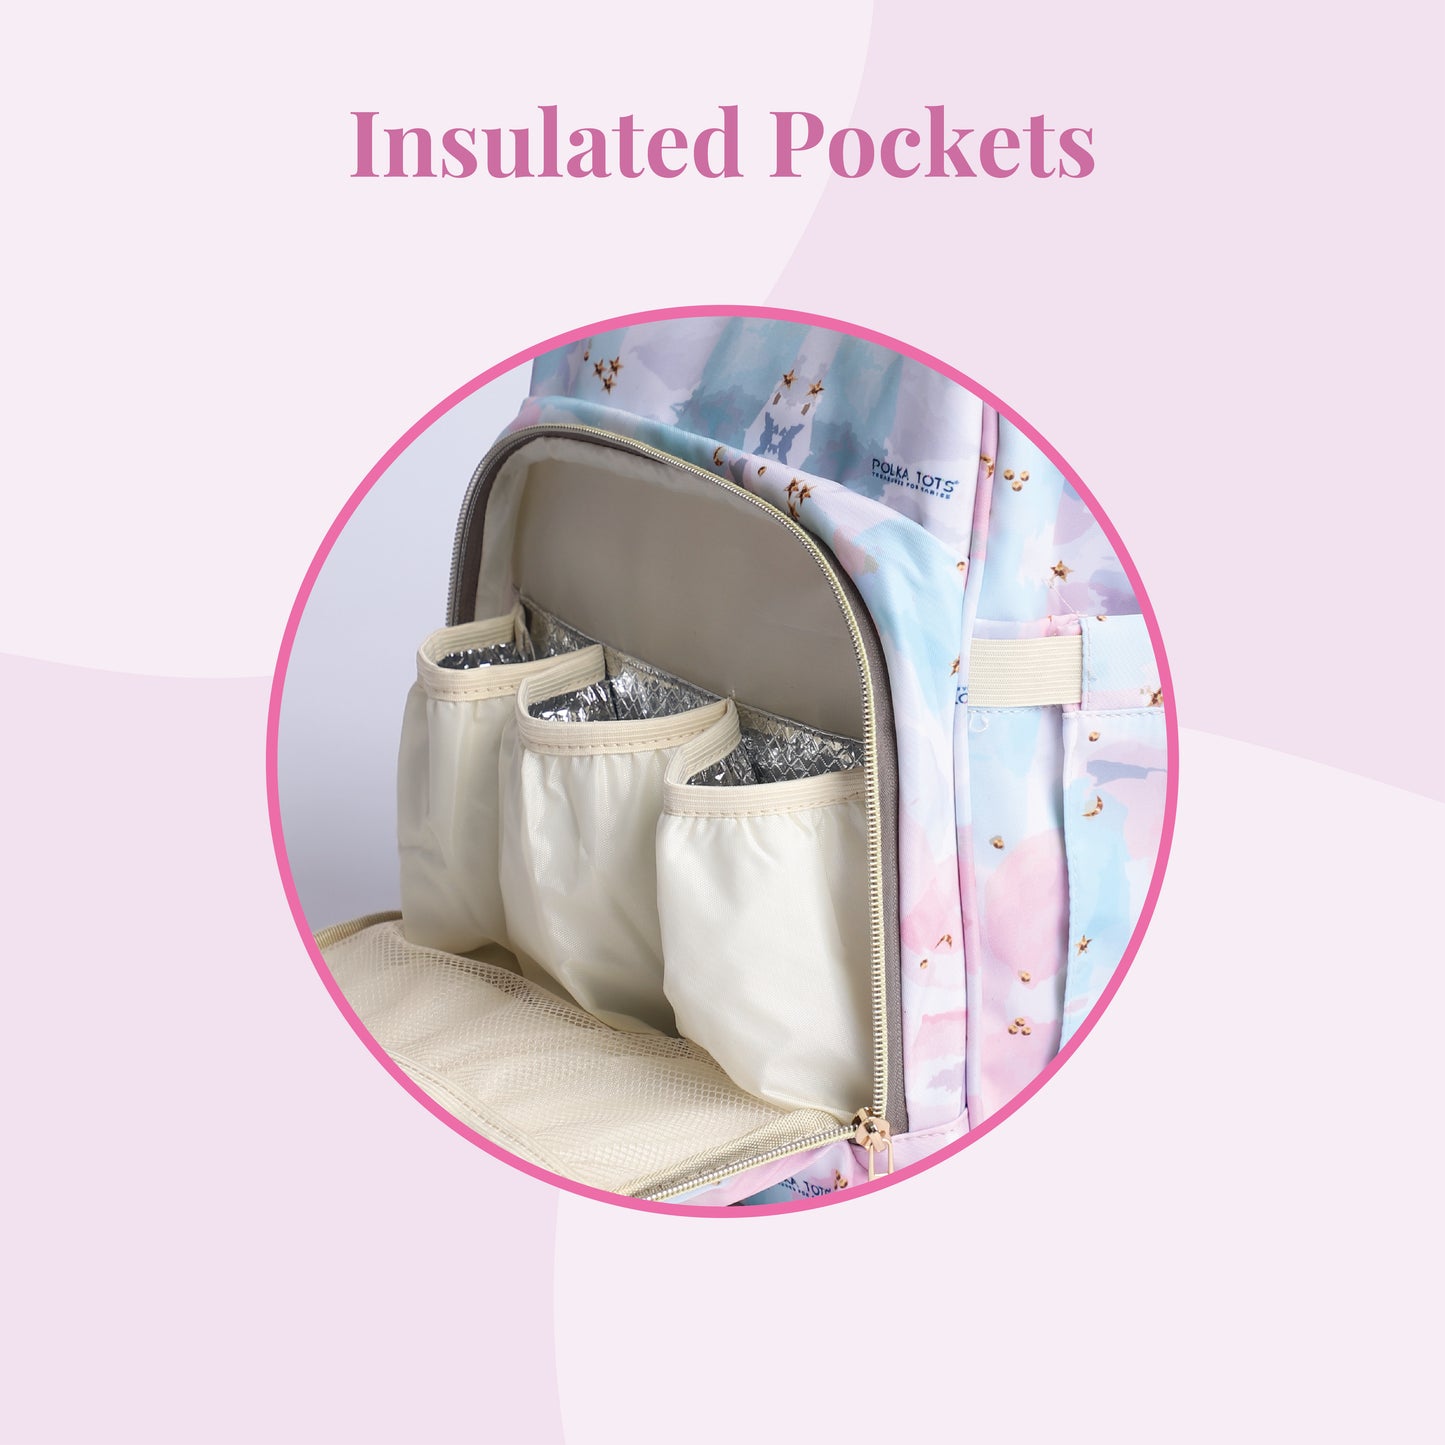 insulated pockets 